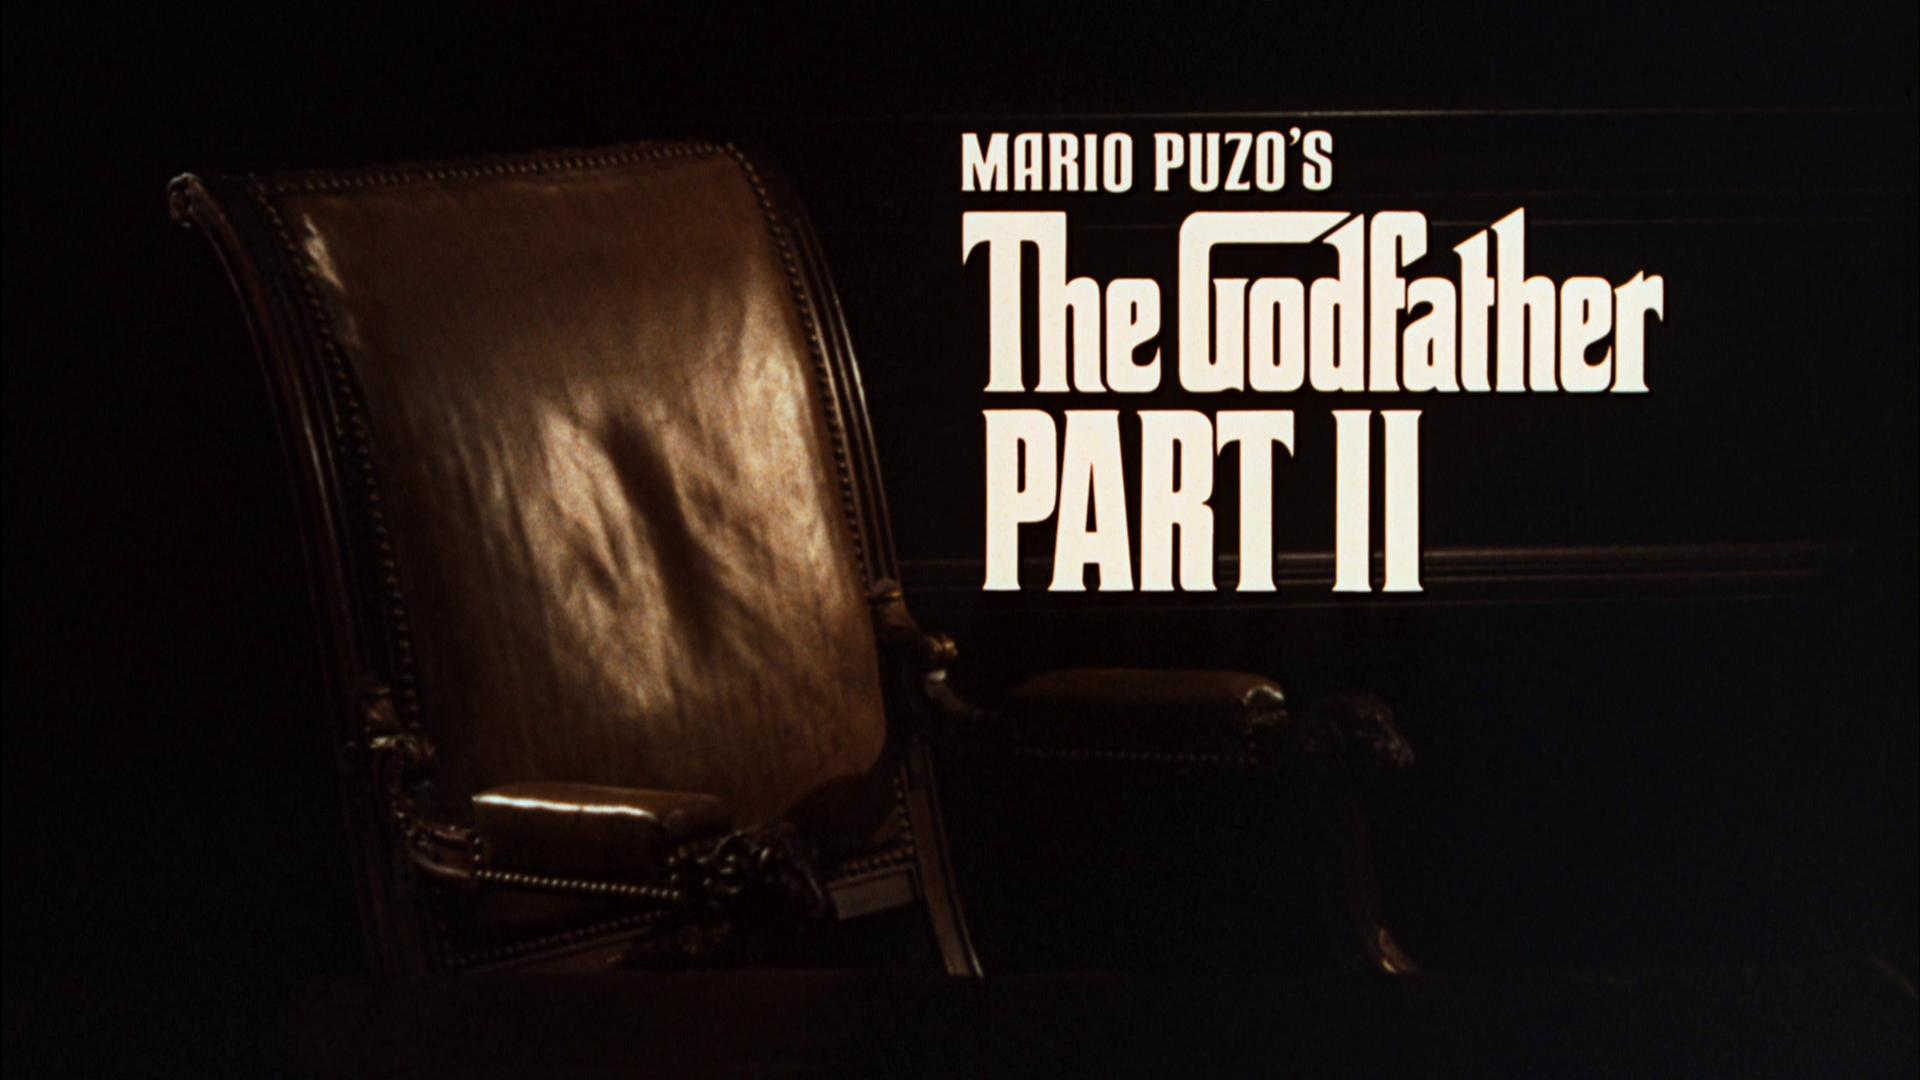 High Resolution Wallpaper | The Godfather: Part II 1920x1080 px